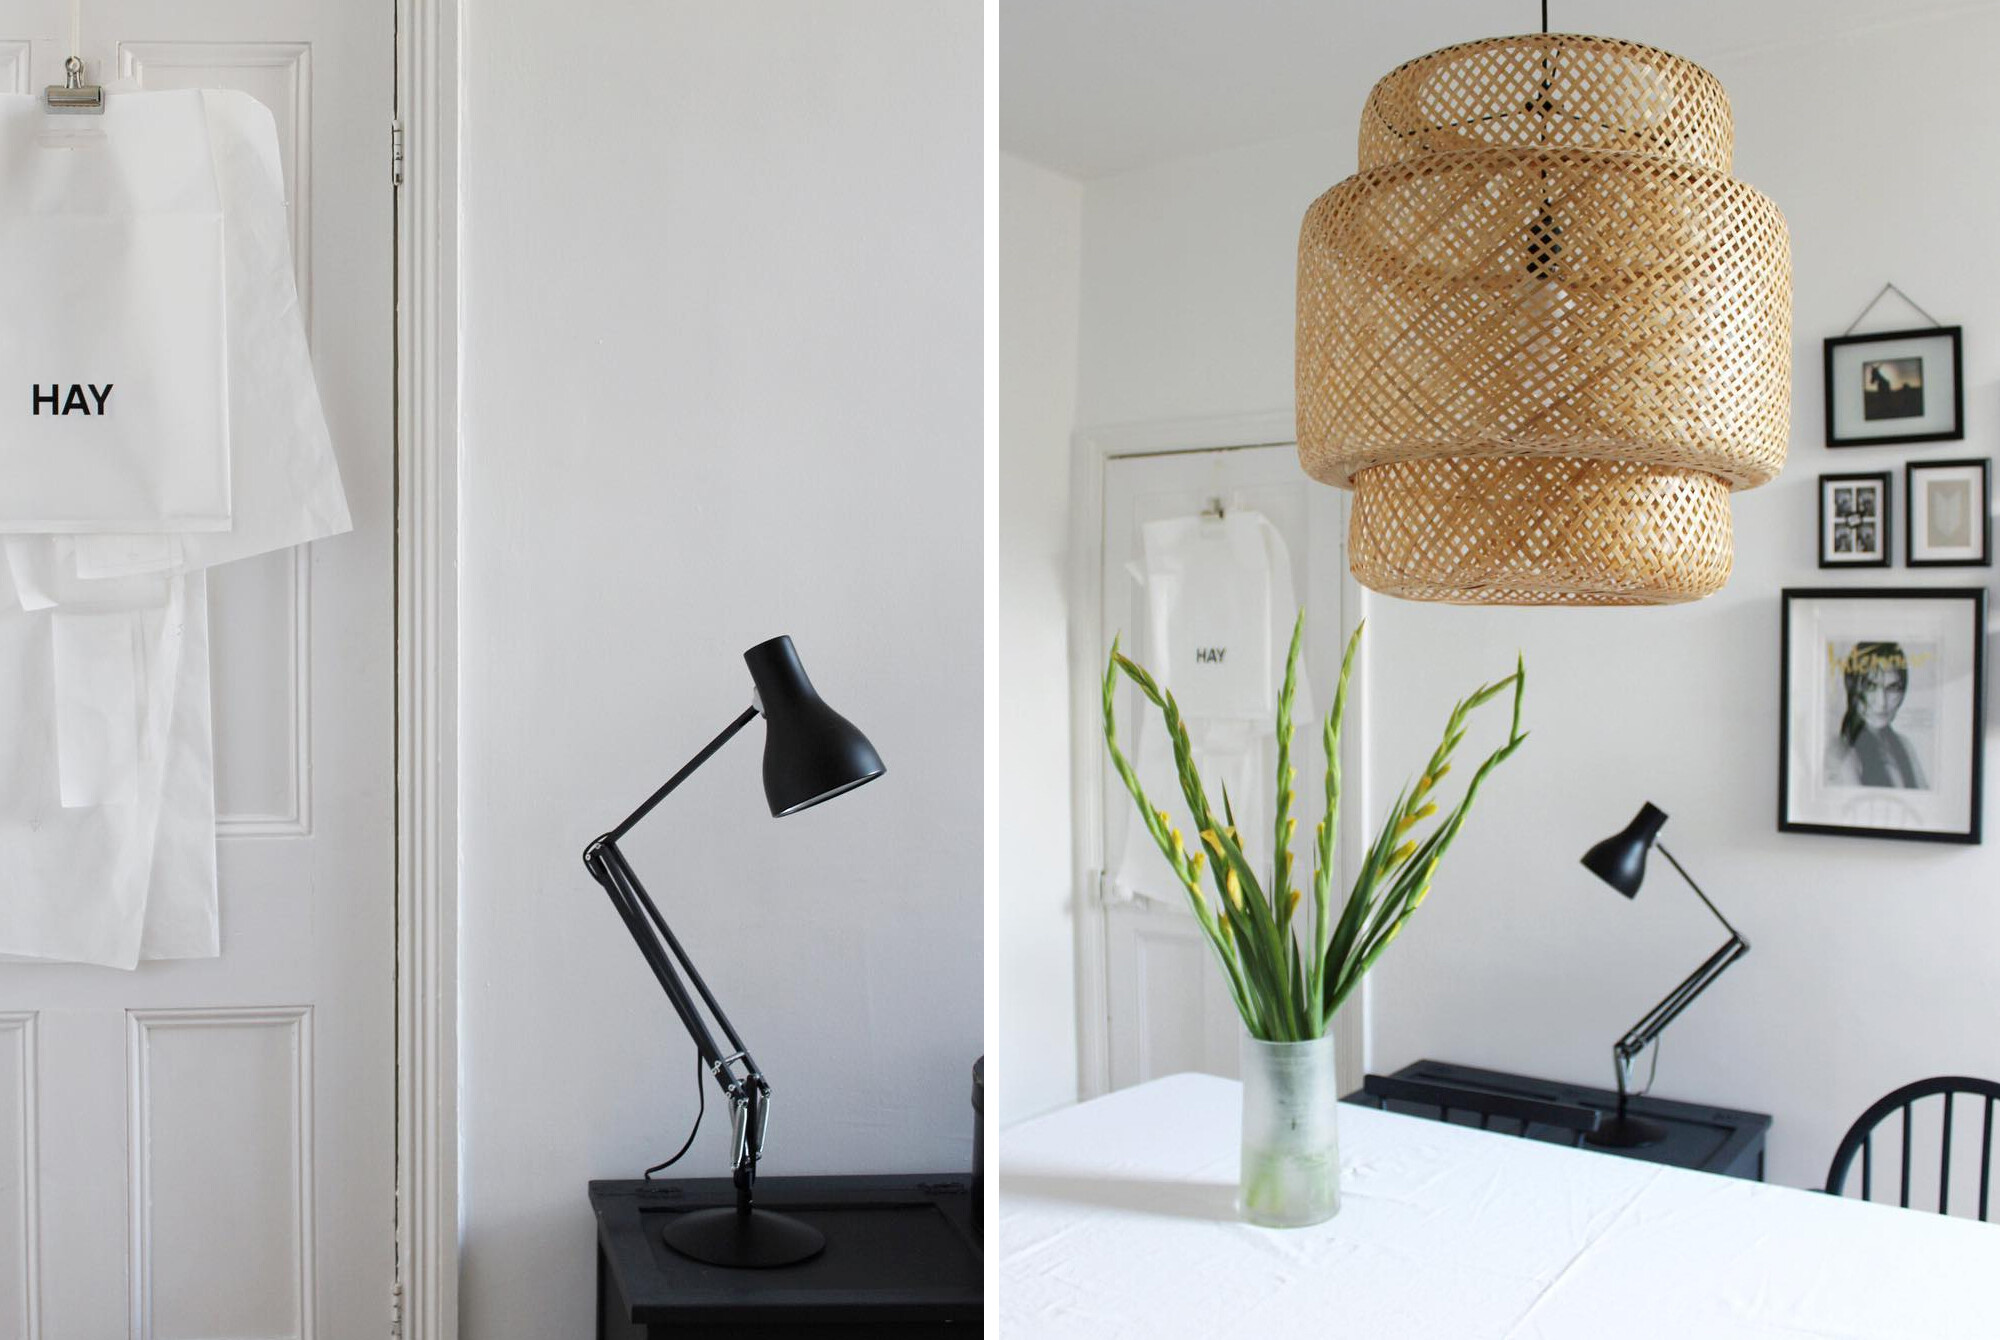 Anglepoise Type 75 lamp in Dan Hull's Home | Image courtesy of Millergrey